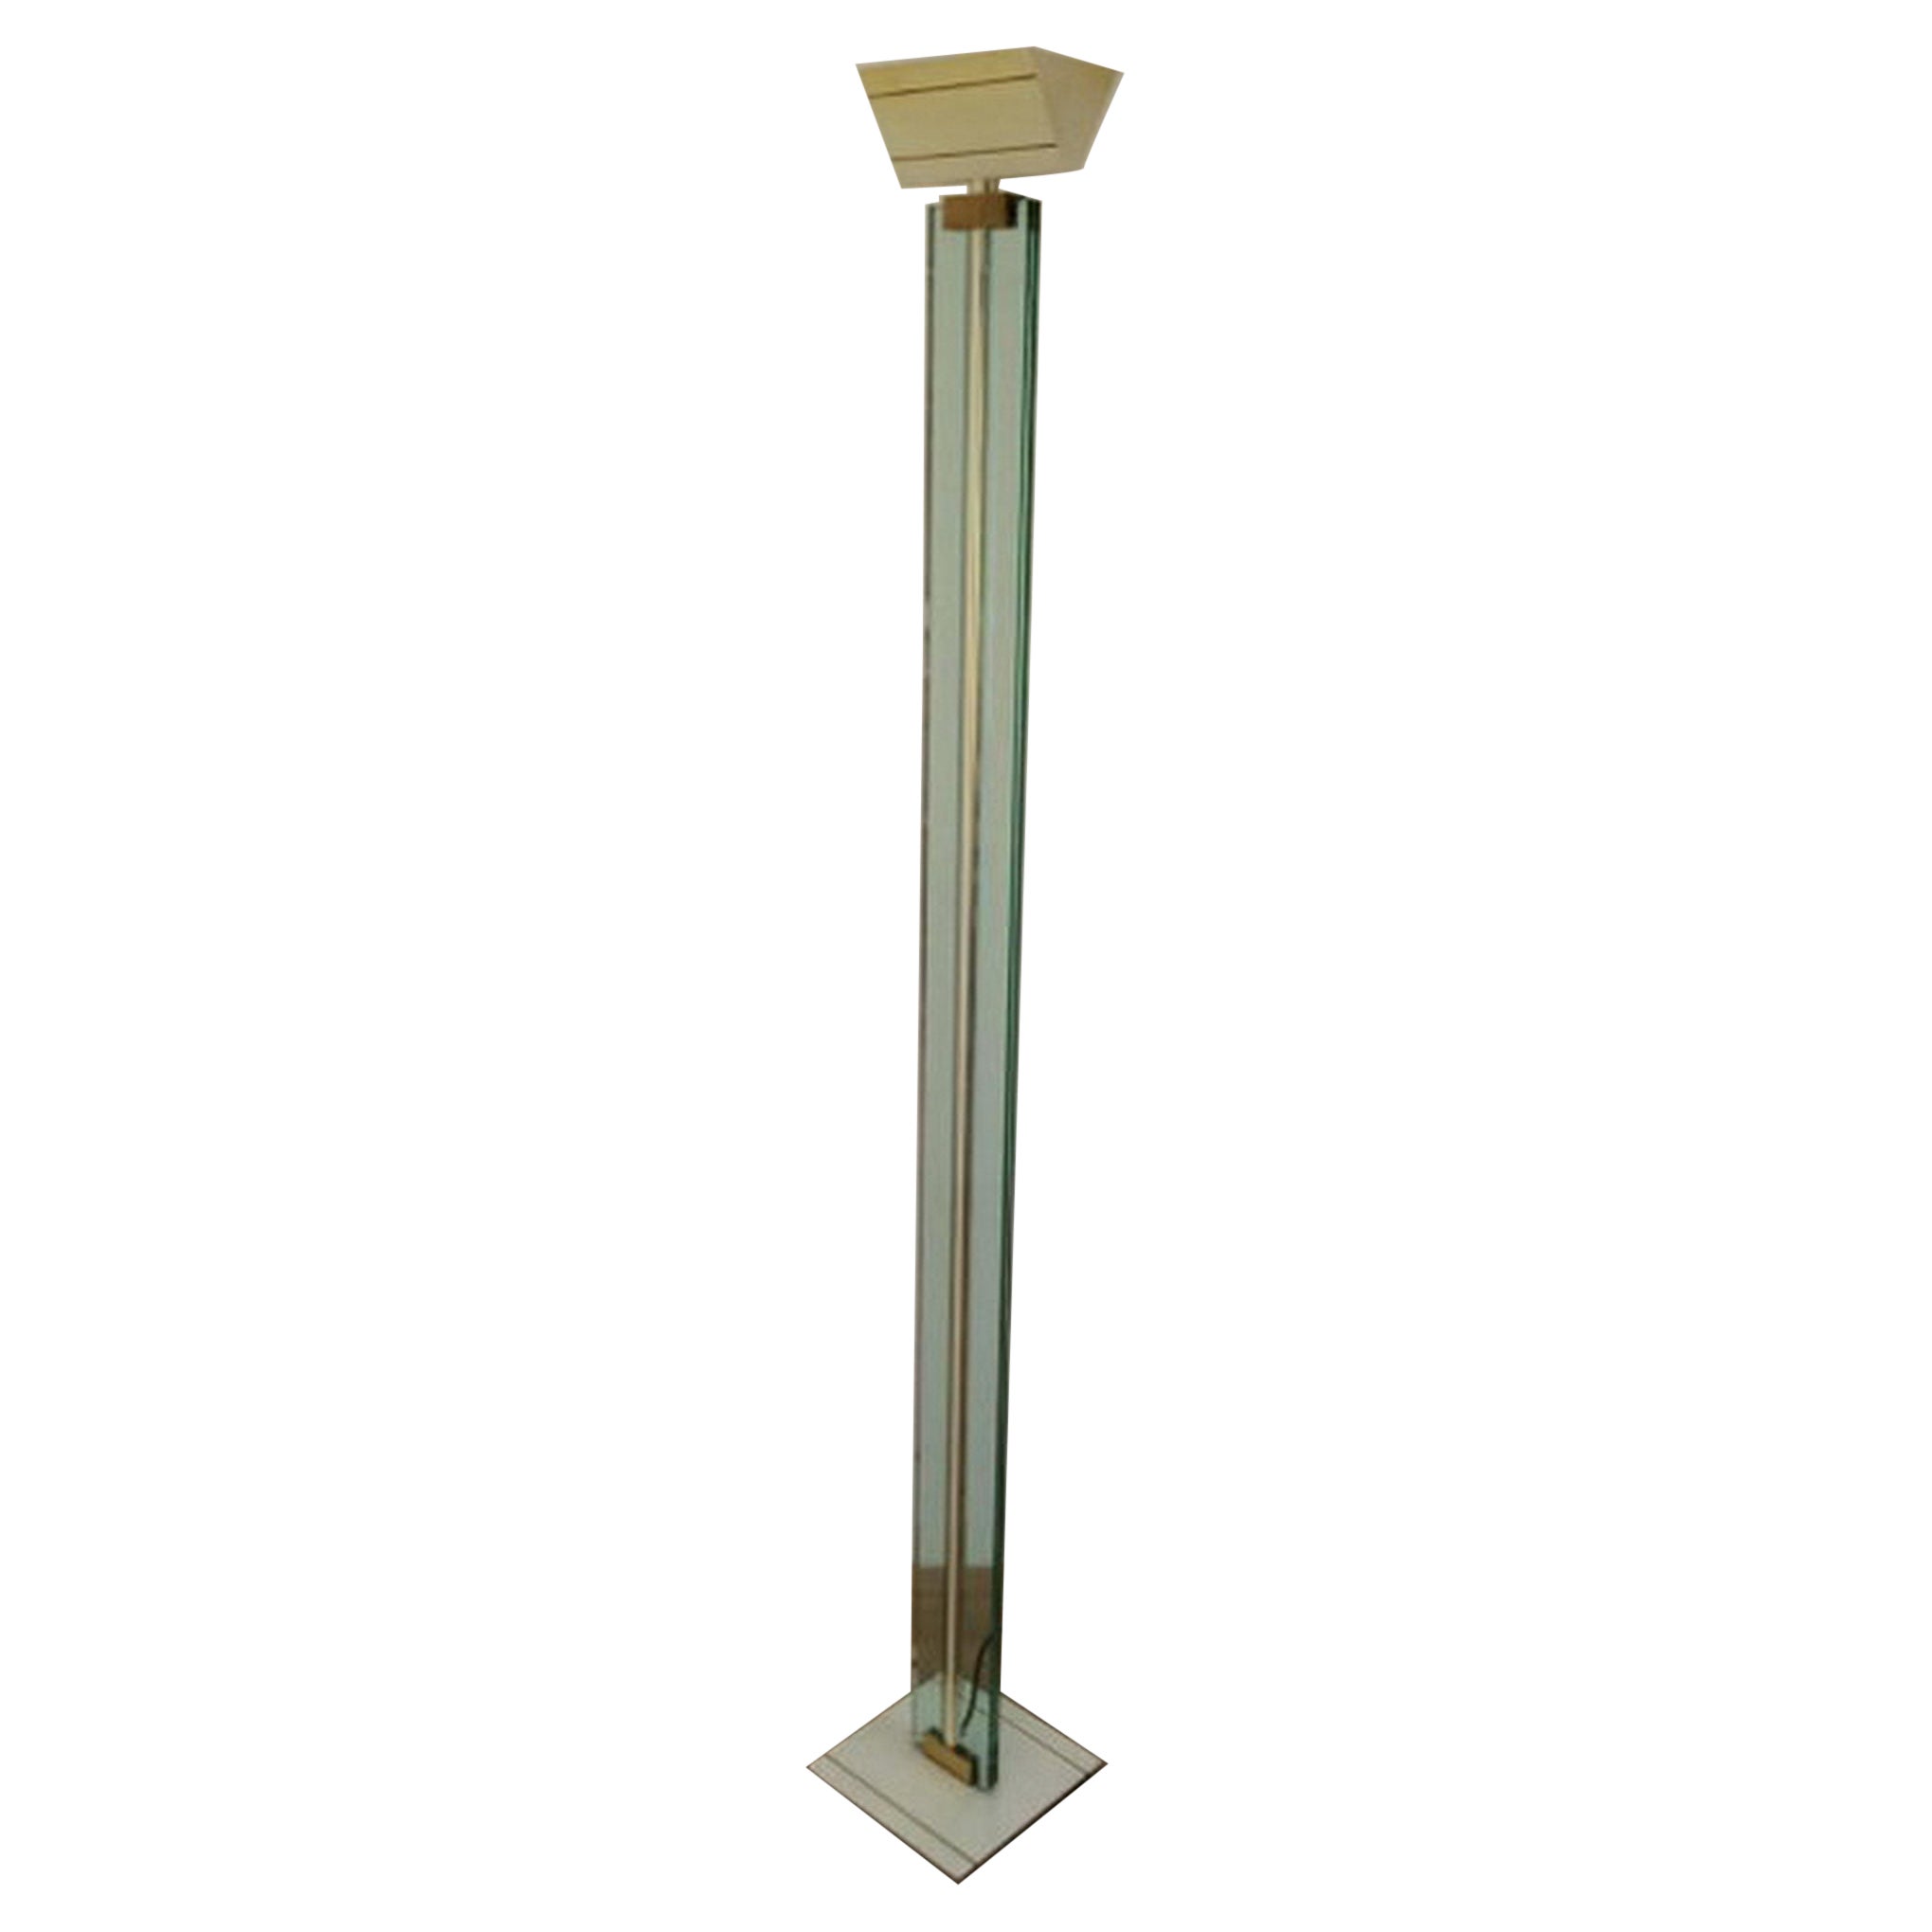 Glass, Brass and Lacquered Metal Floor Lamp, Circa 1970